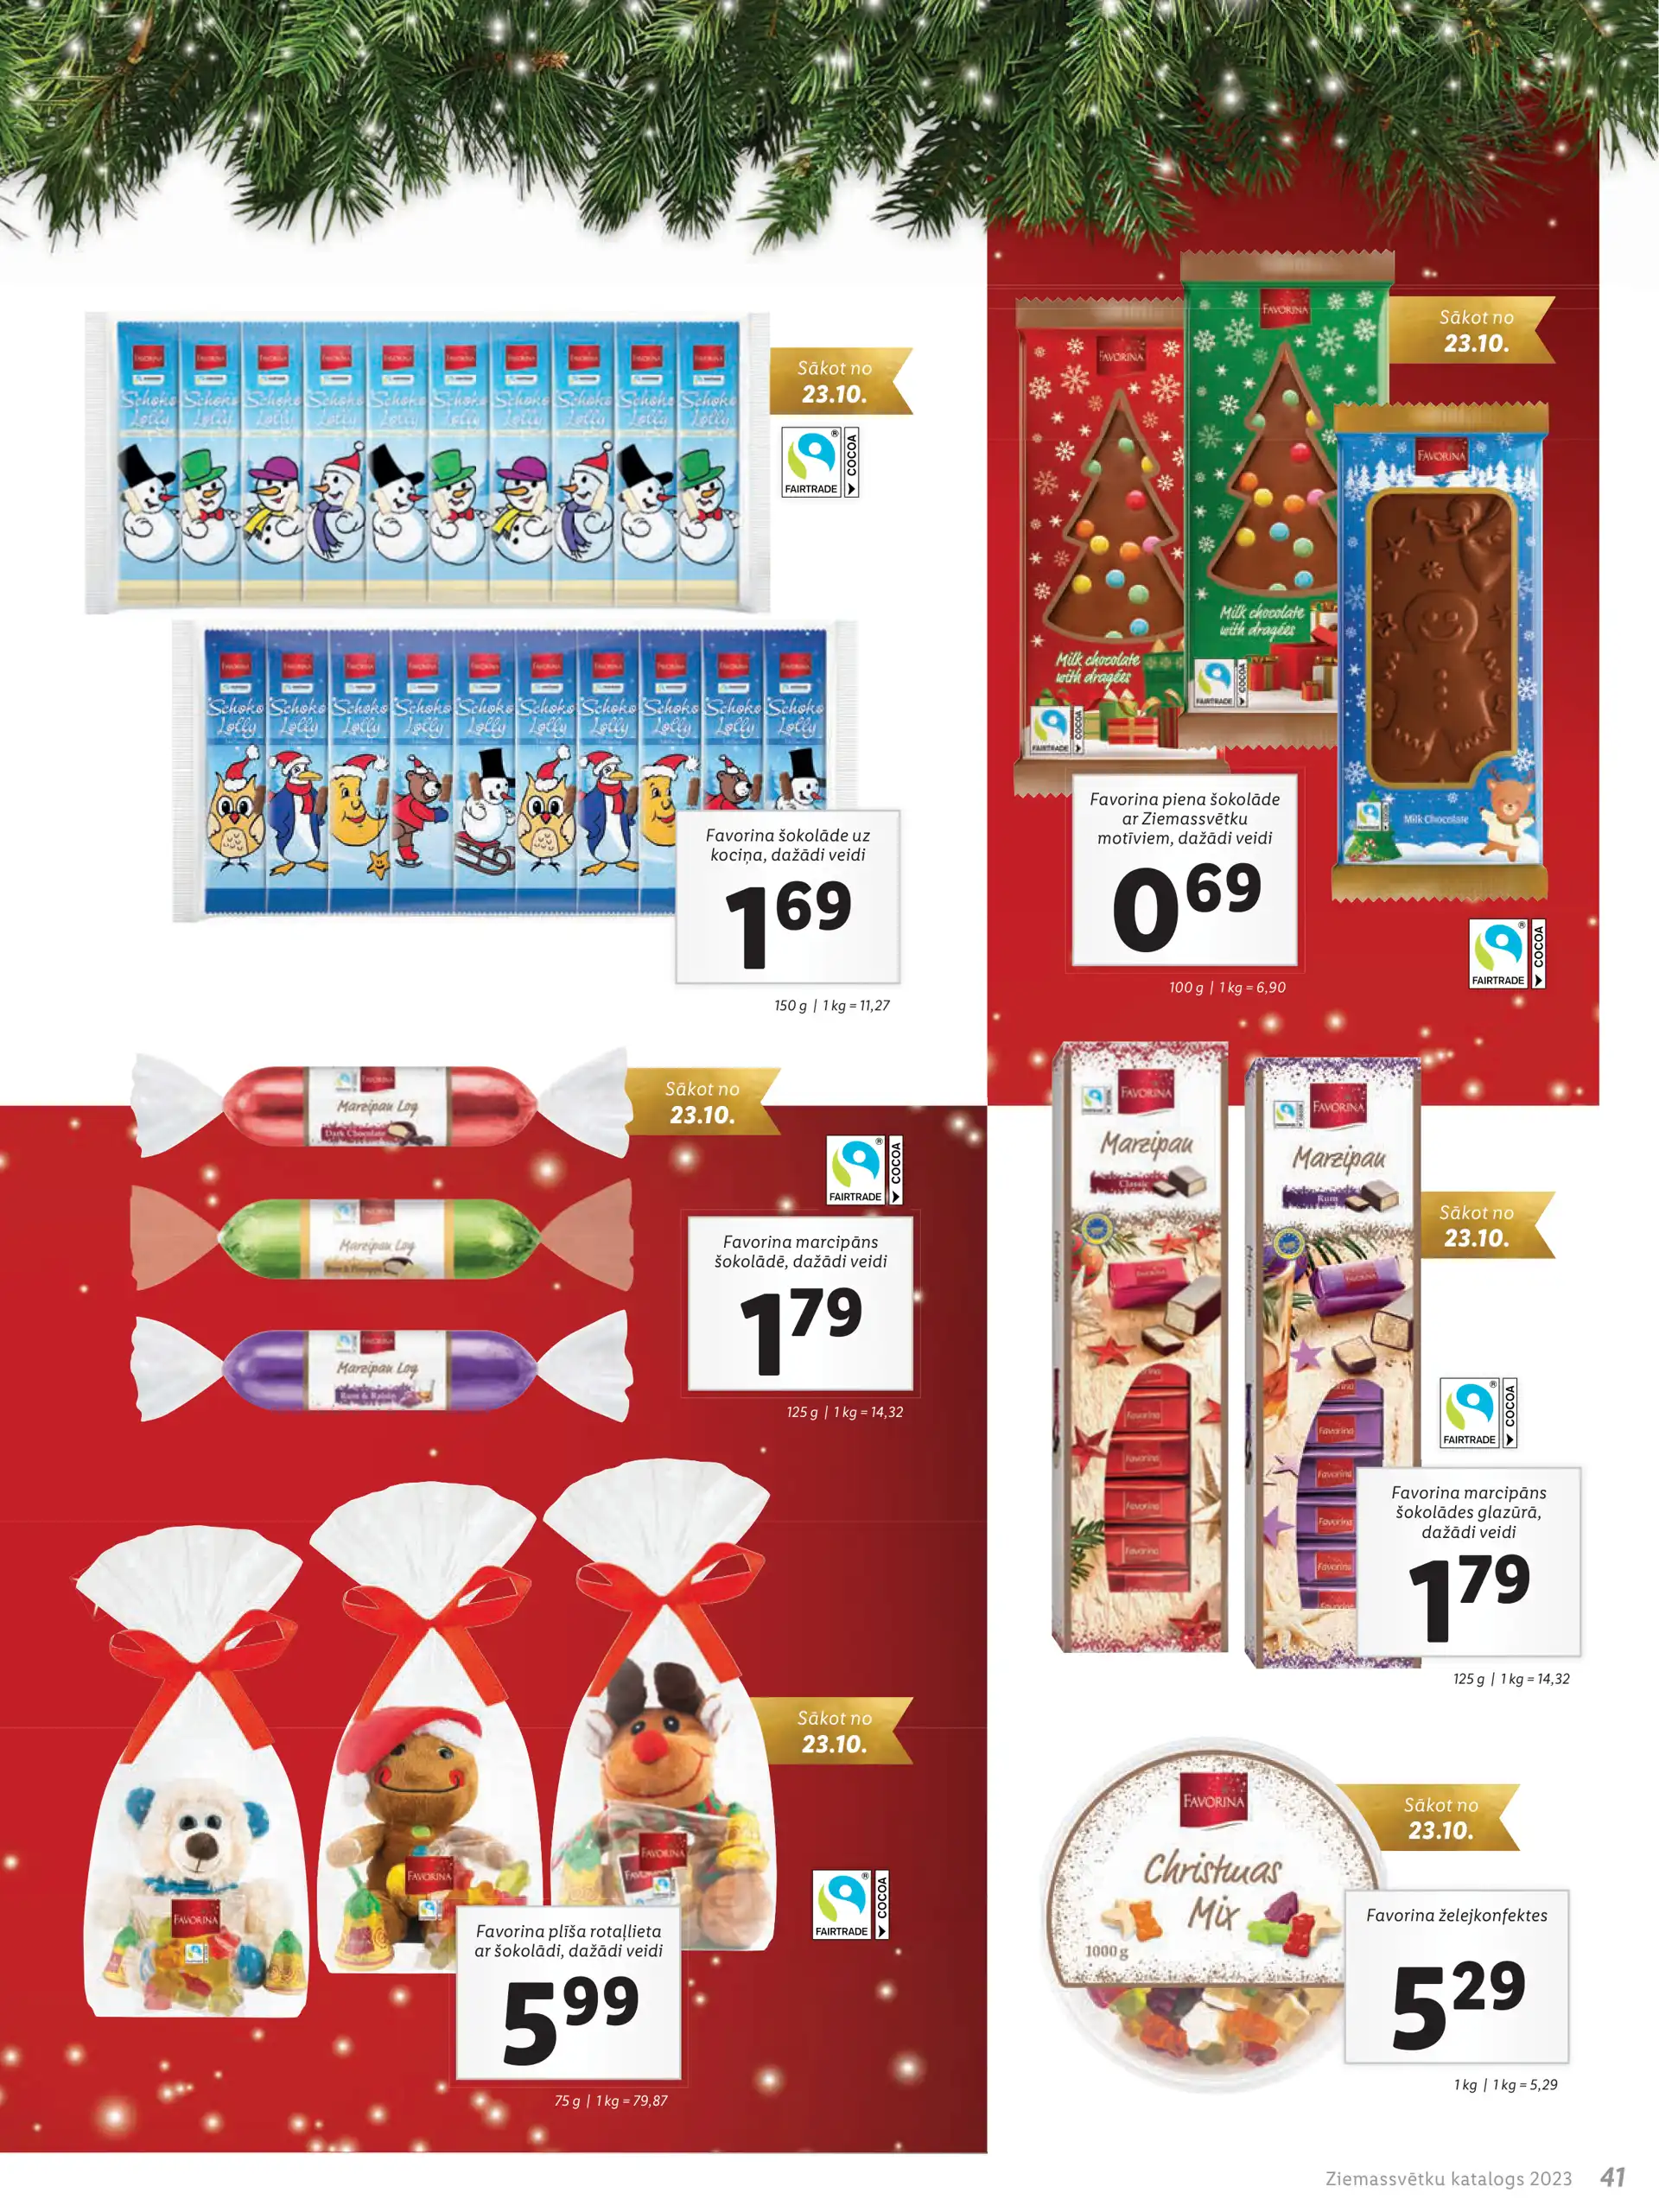 LIDL 13-11-2023 13-25-36 Page 41